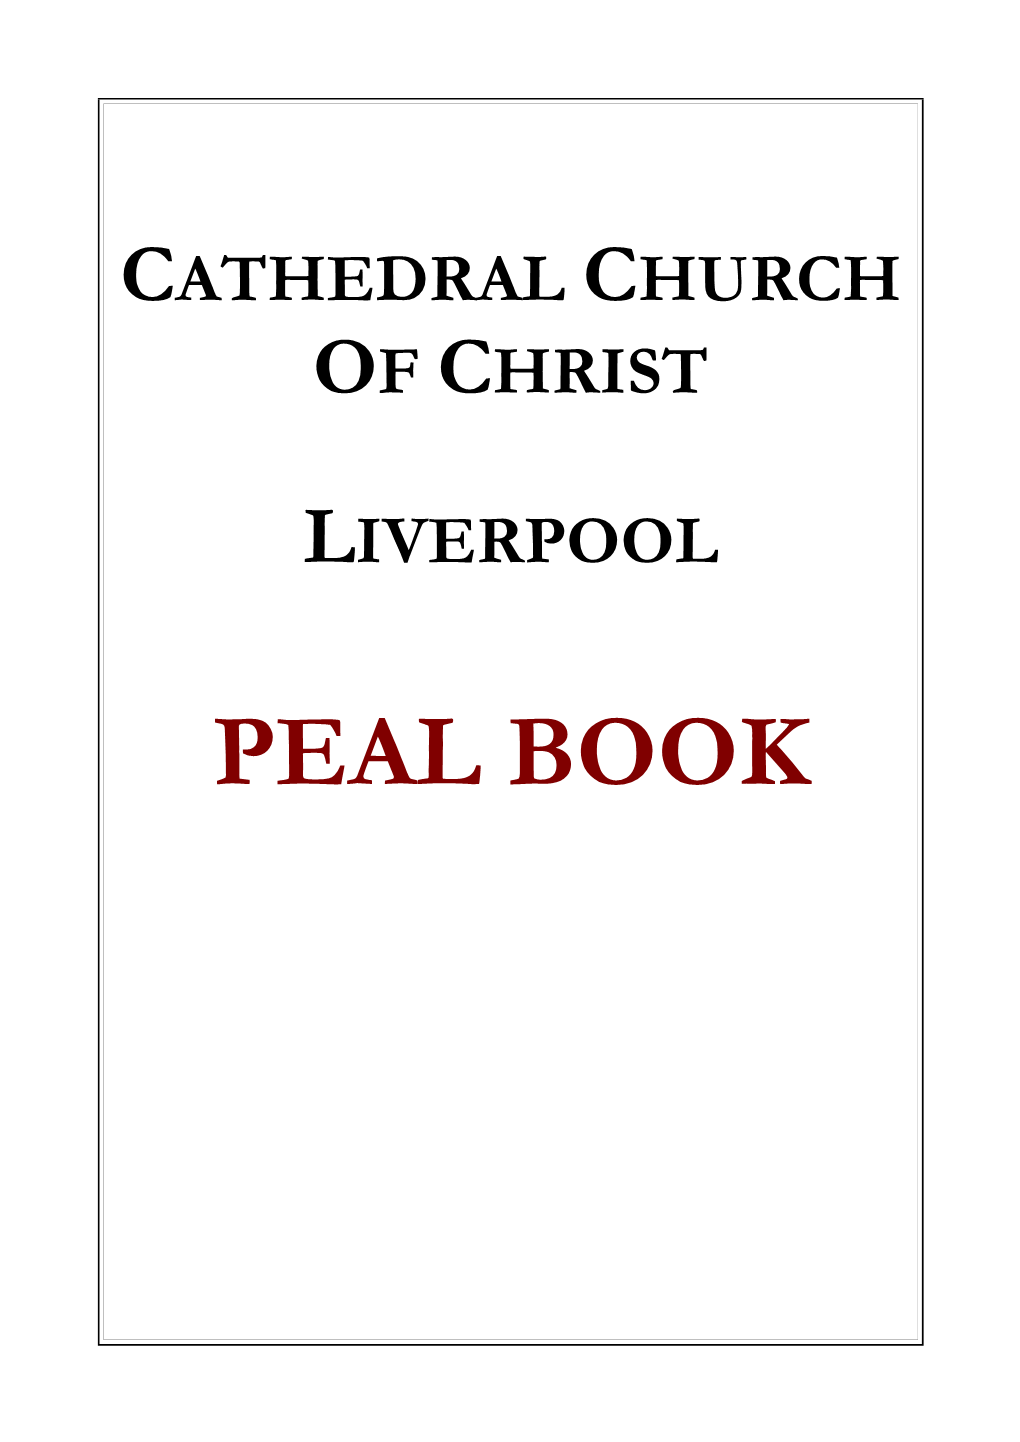 Cathedral Peal Book 1965-2017